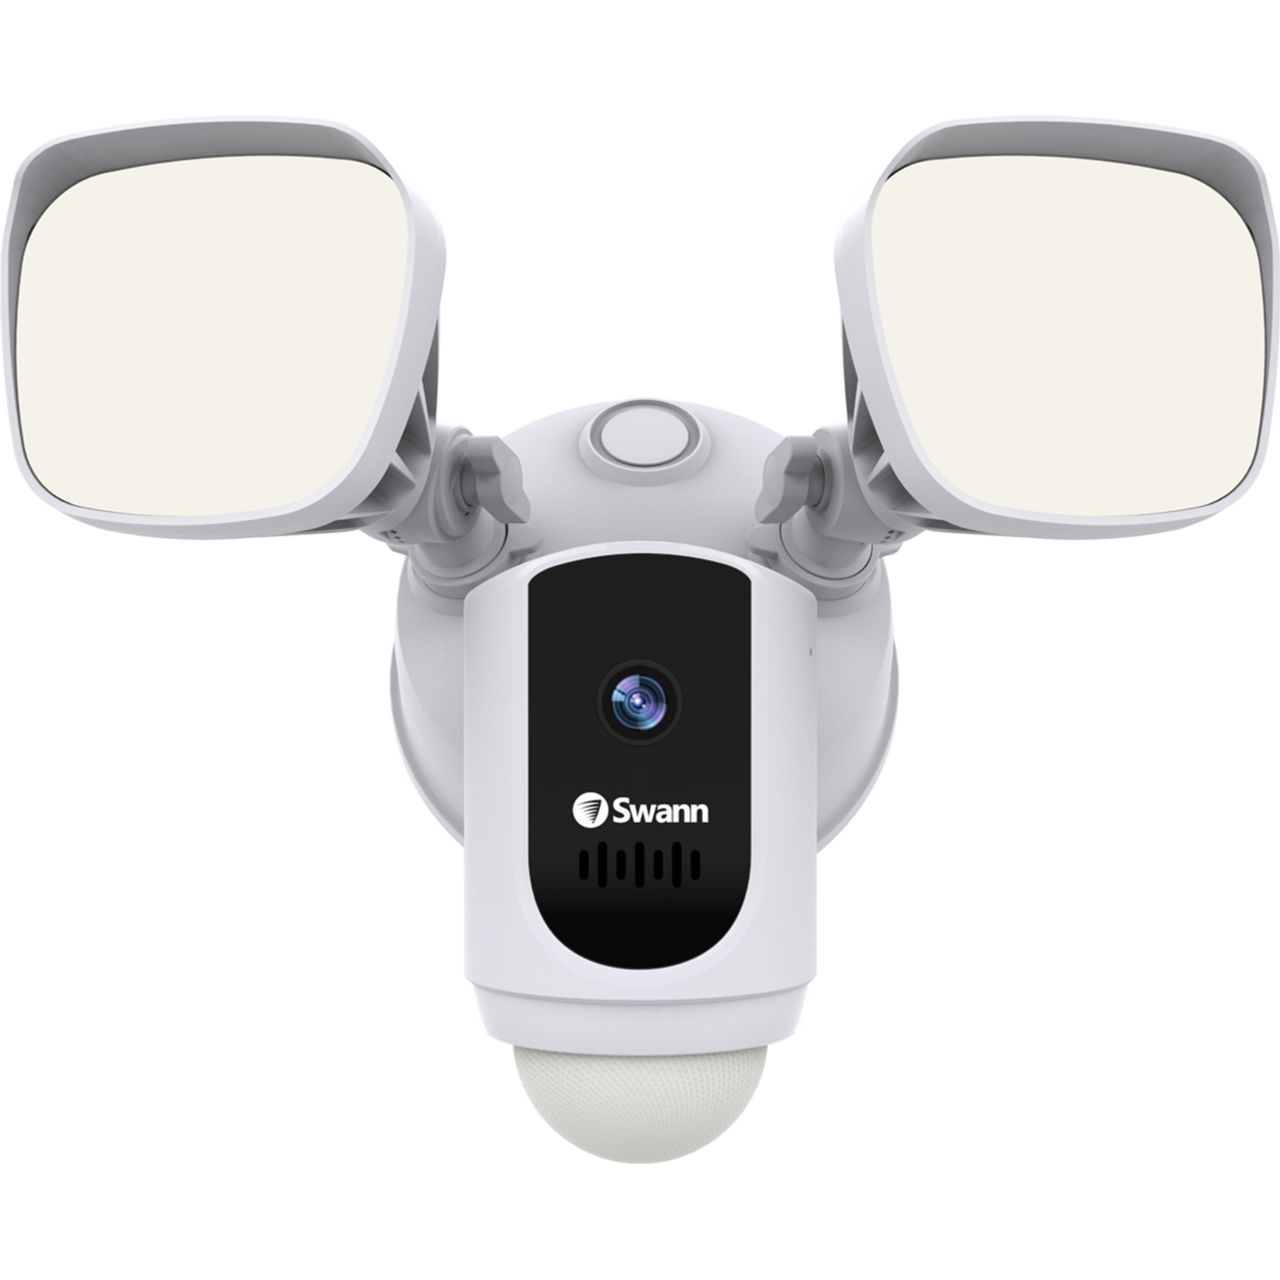 Swann Smart Floodlight Security Camera Full HD 1080p Review